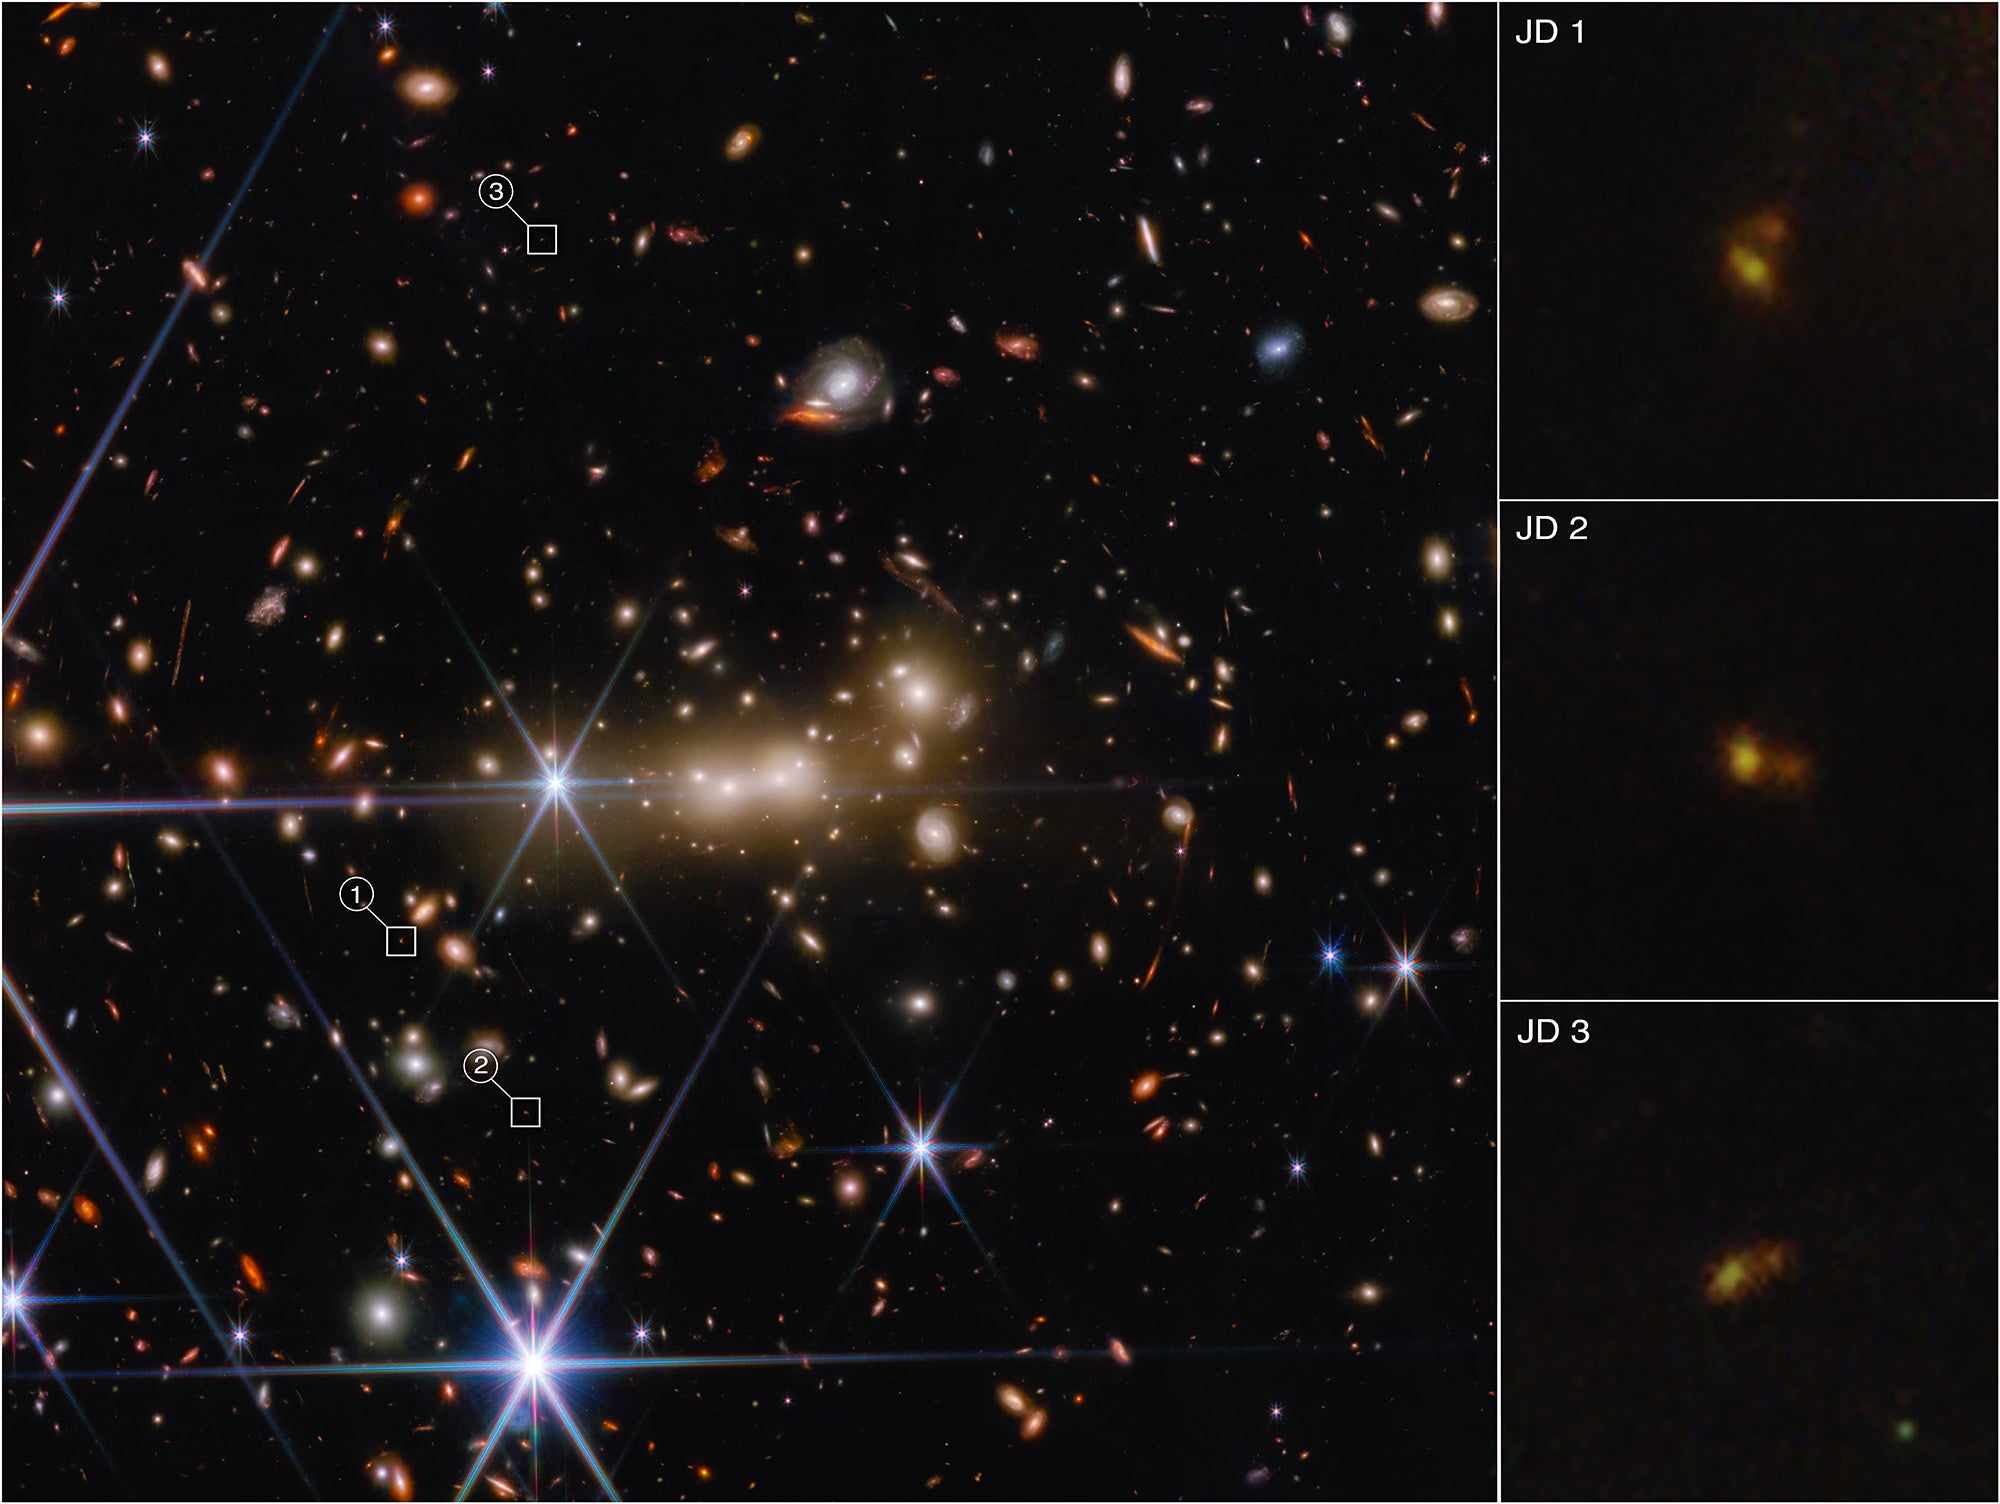 The James Webb Space Telescope uncovered two galaxies where scientists though there were only one using a technique called gravitational lensing, which creates three separately magnified images of the galaxy pair